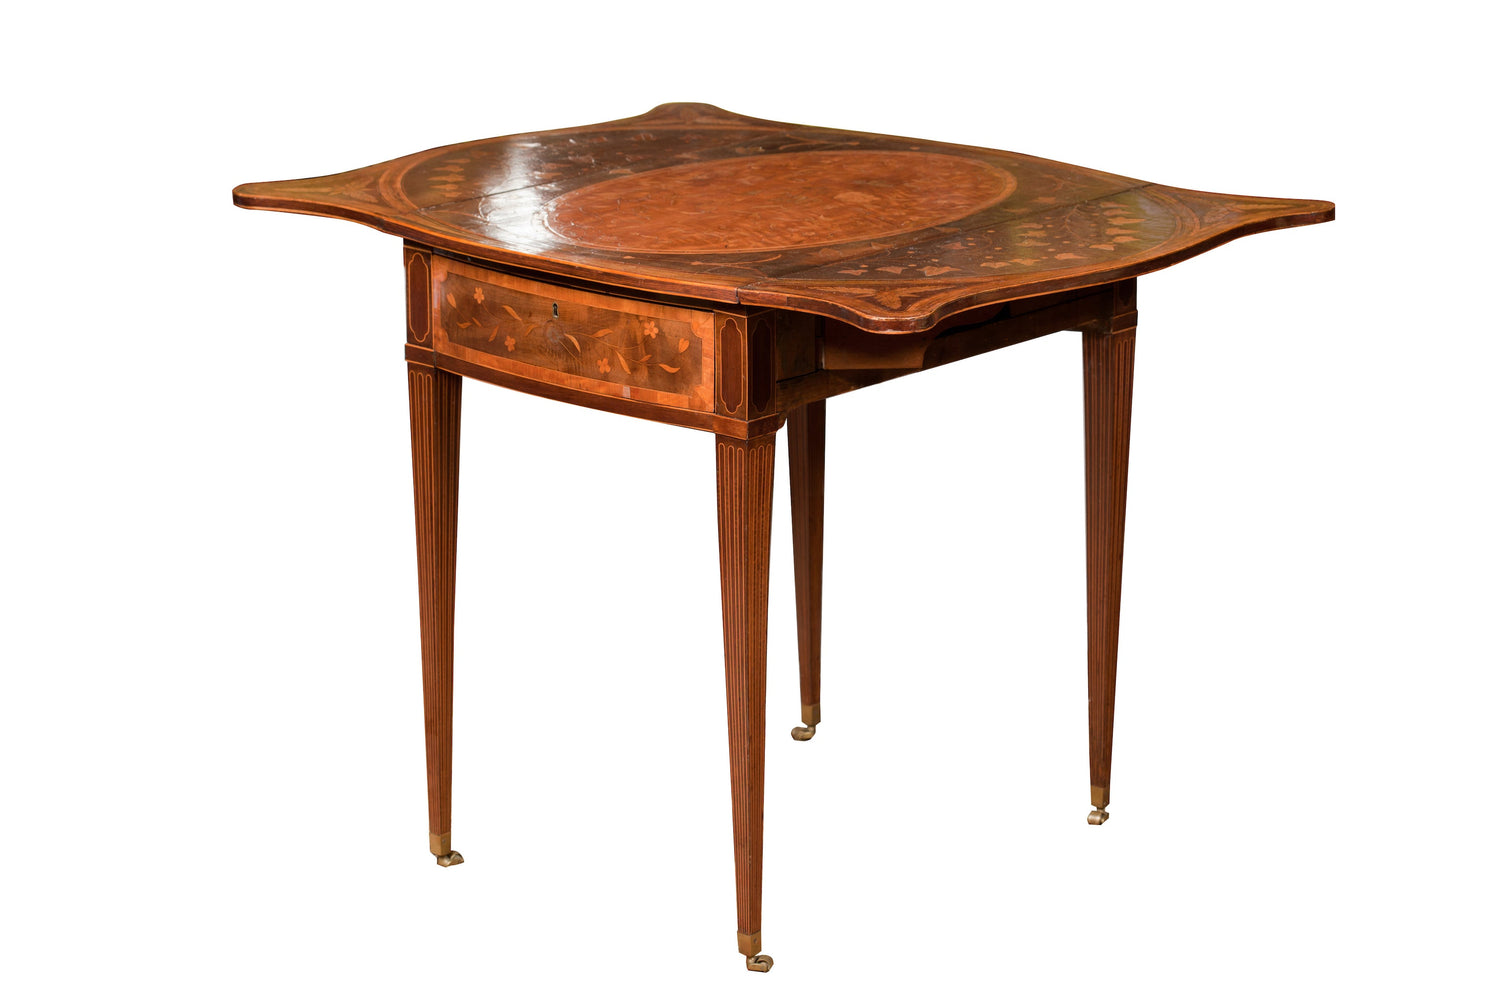 Harewood-Marquetry-Serpentine-Pembroke-Table-1